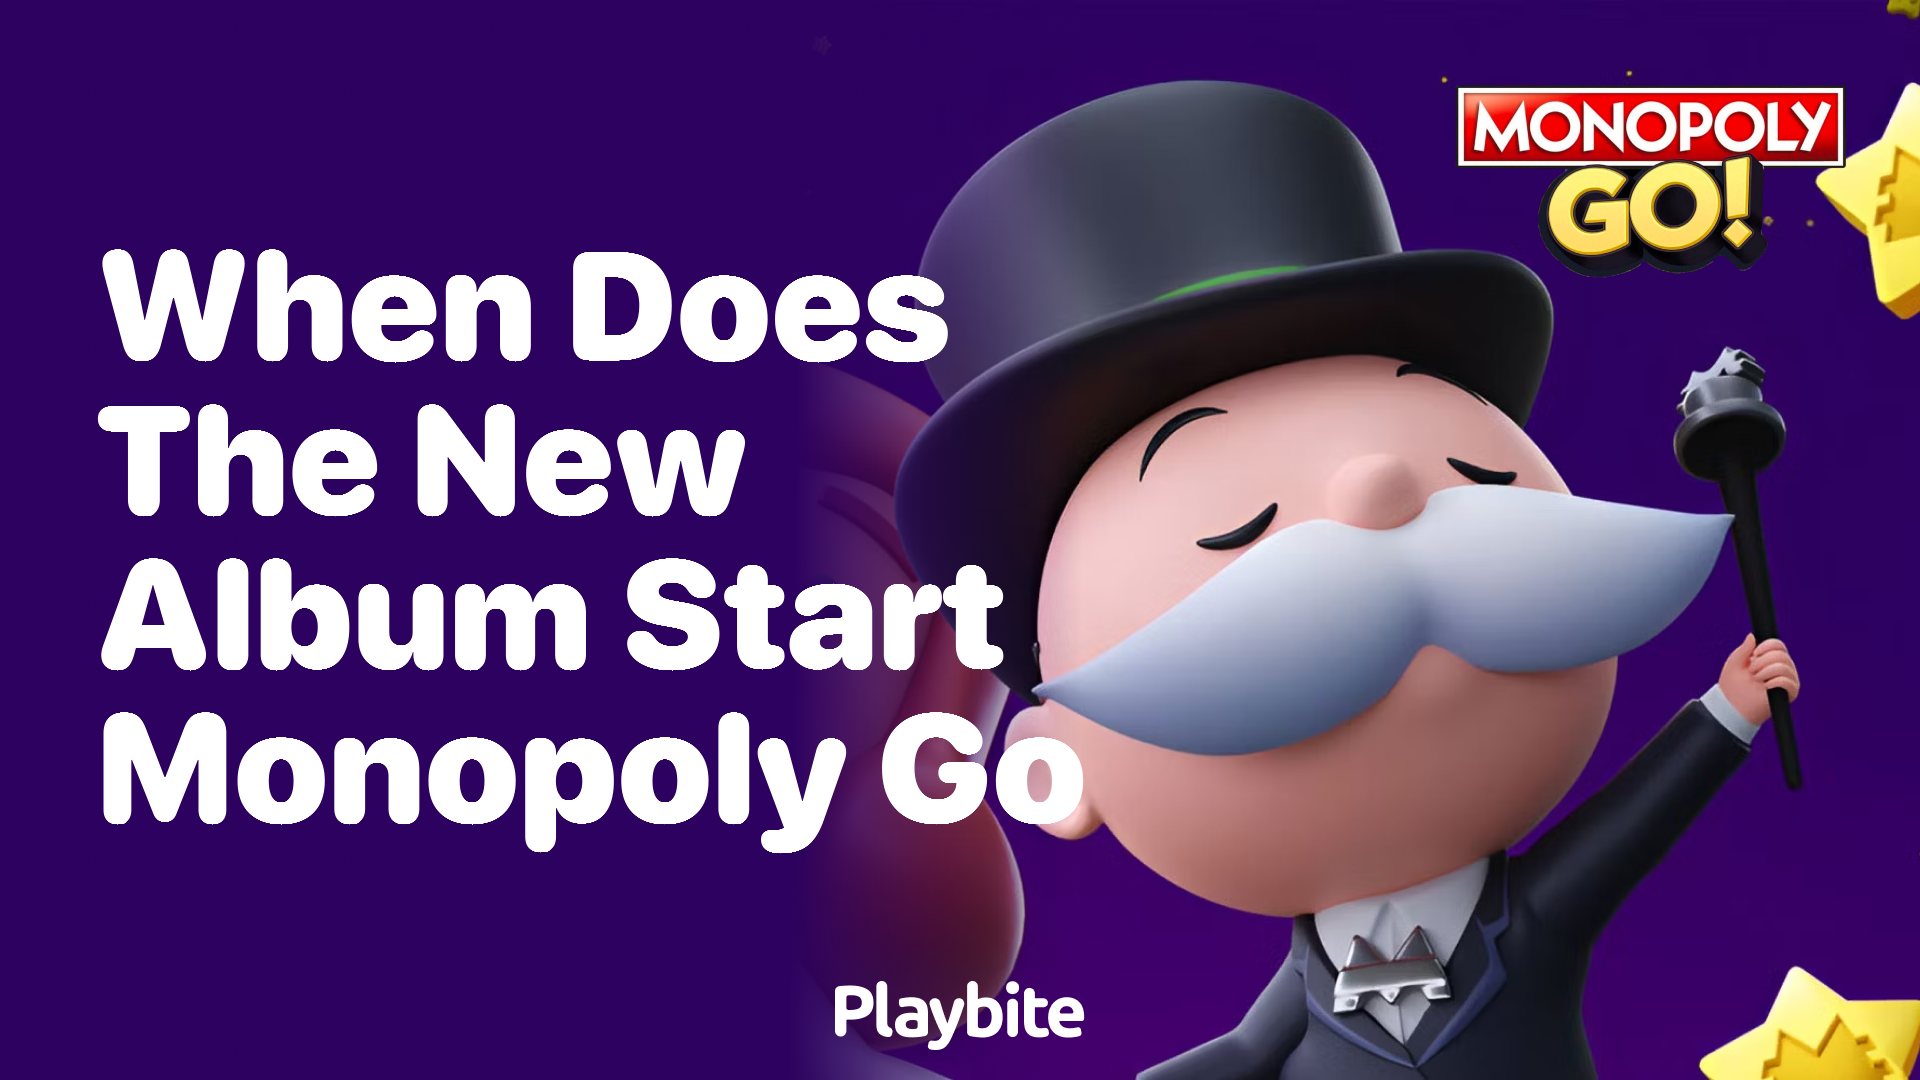 When Does the New Album Start in Monopoly Go?